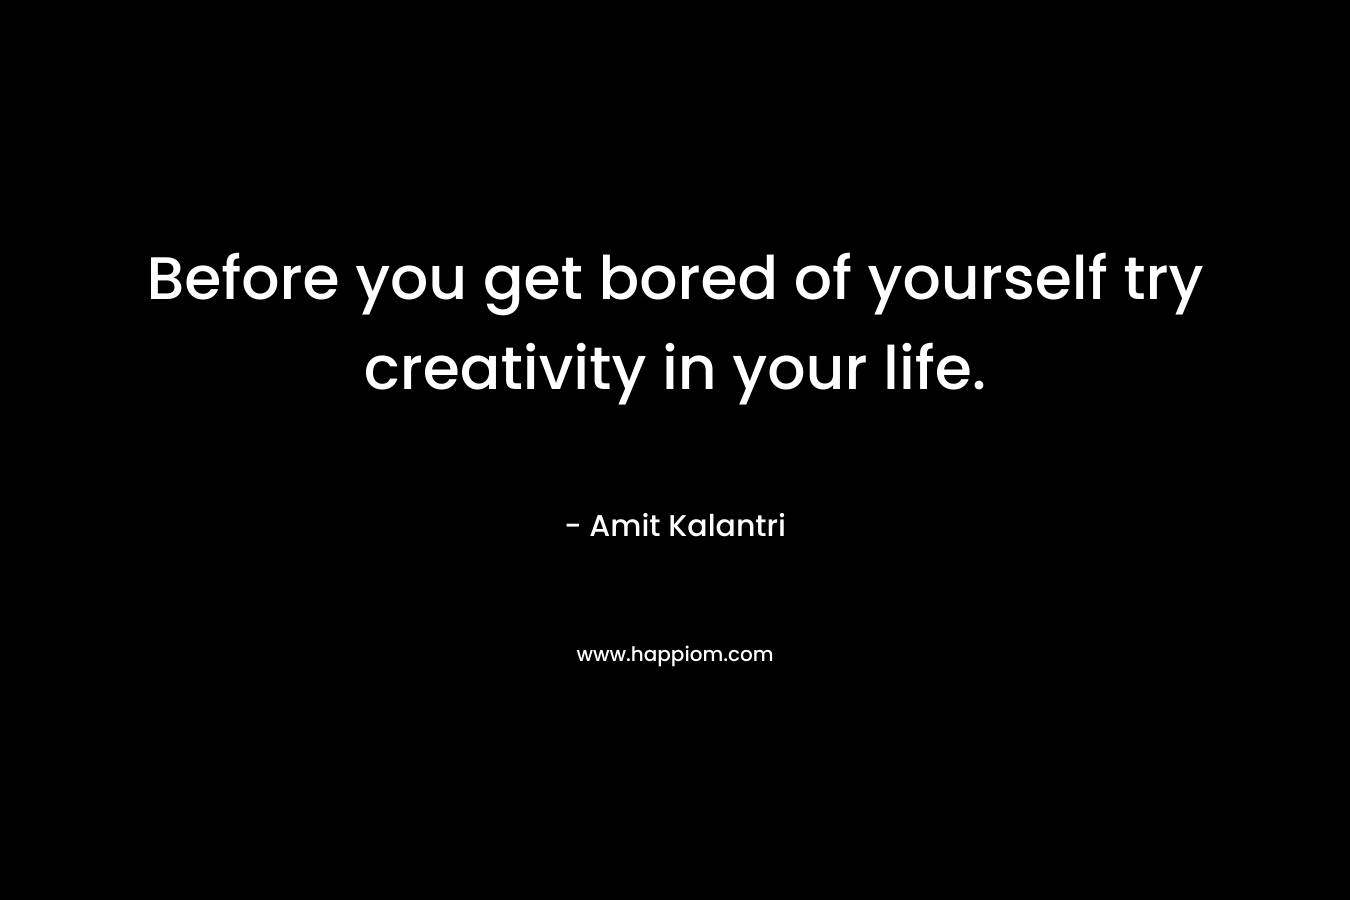 Before you get bored of yourself try creativity in your life.